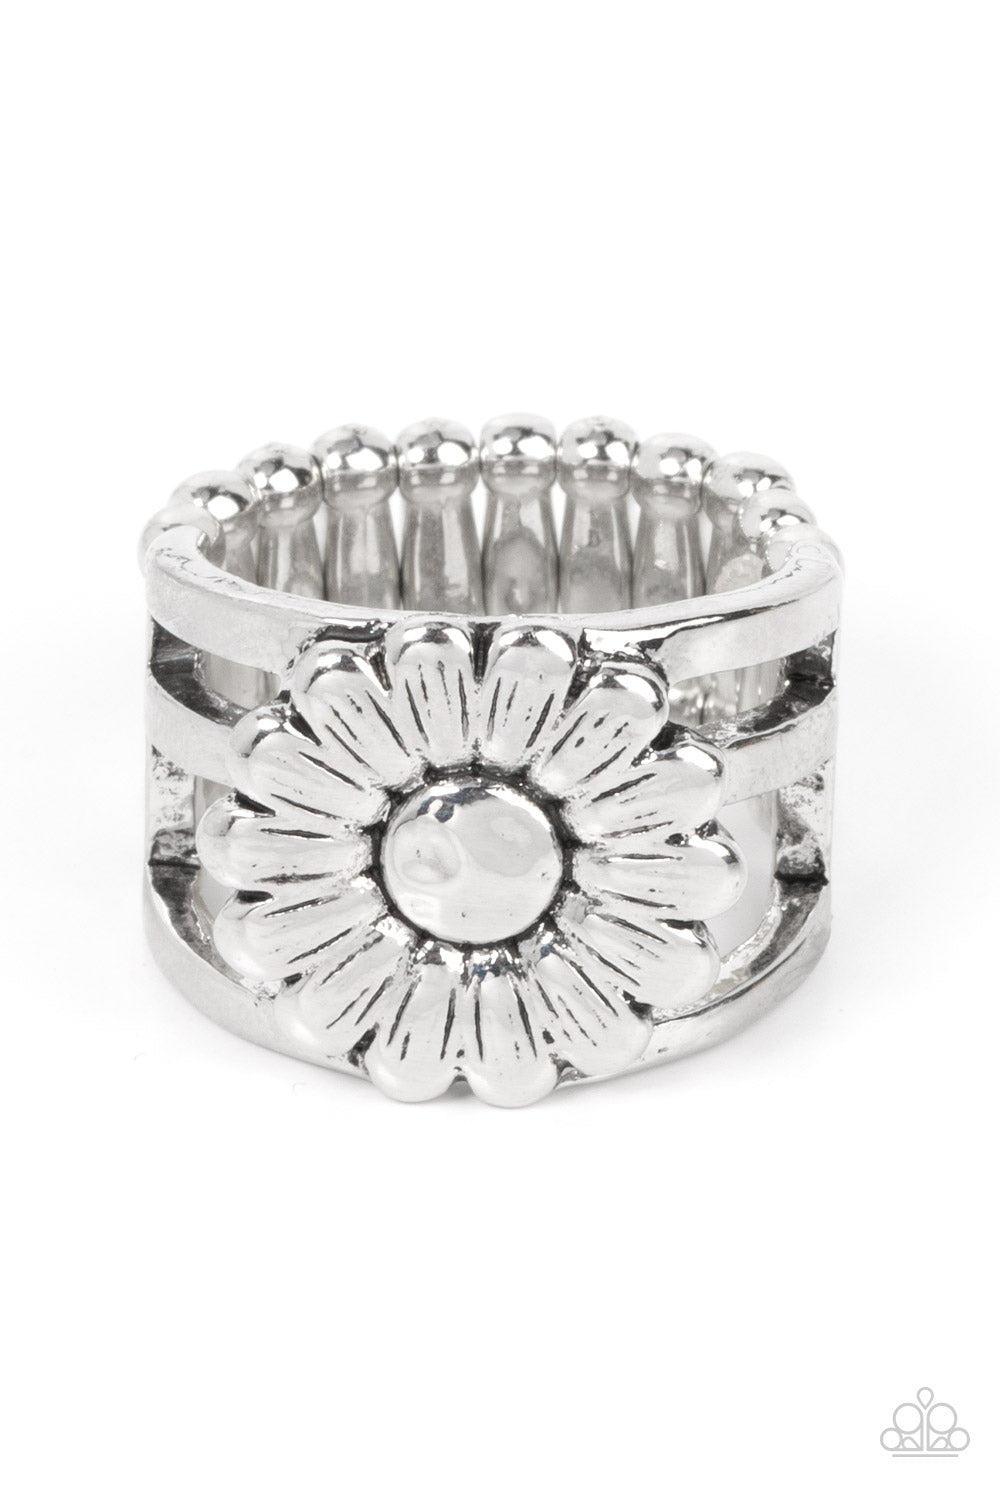 Roadside Daisies - Silver (Daisy Bloom) Ring